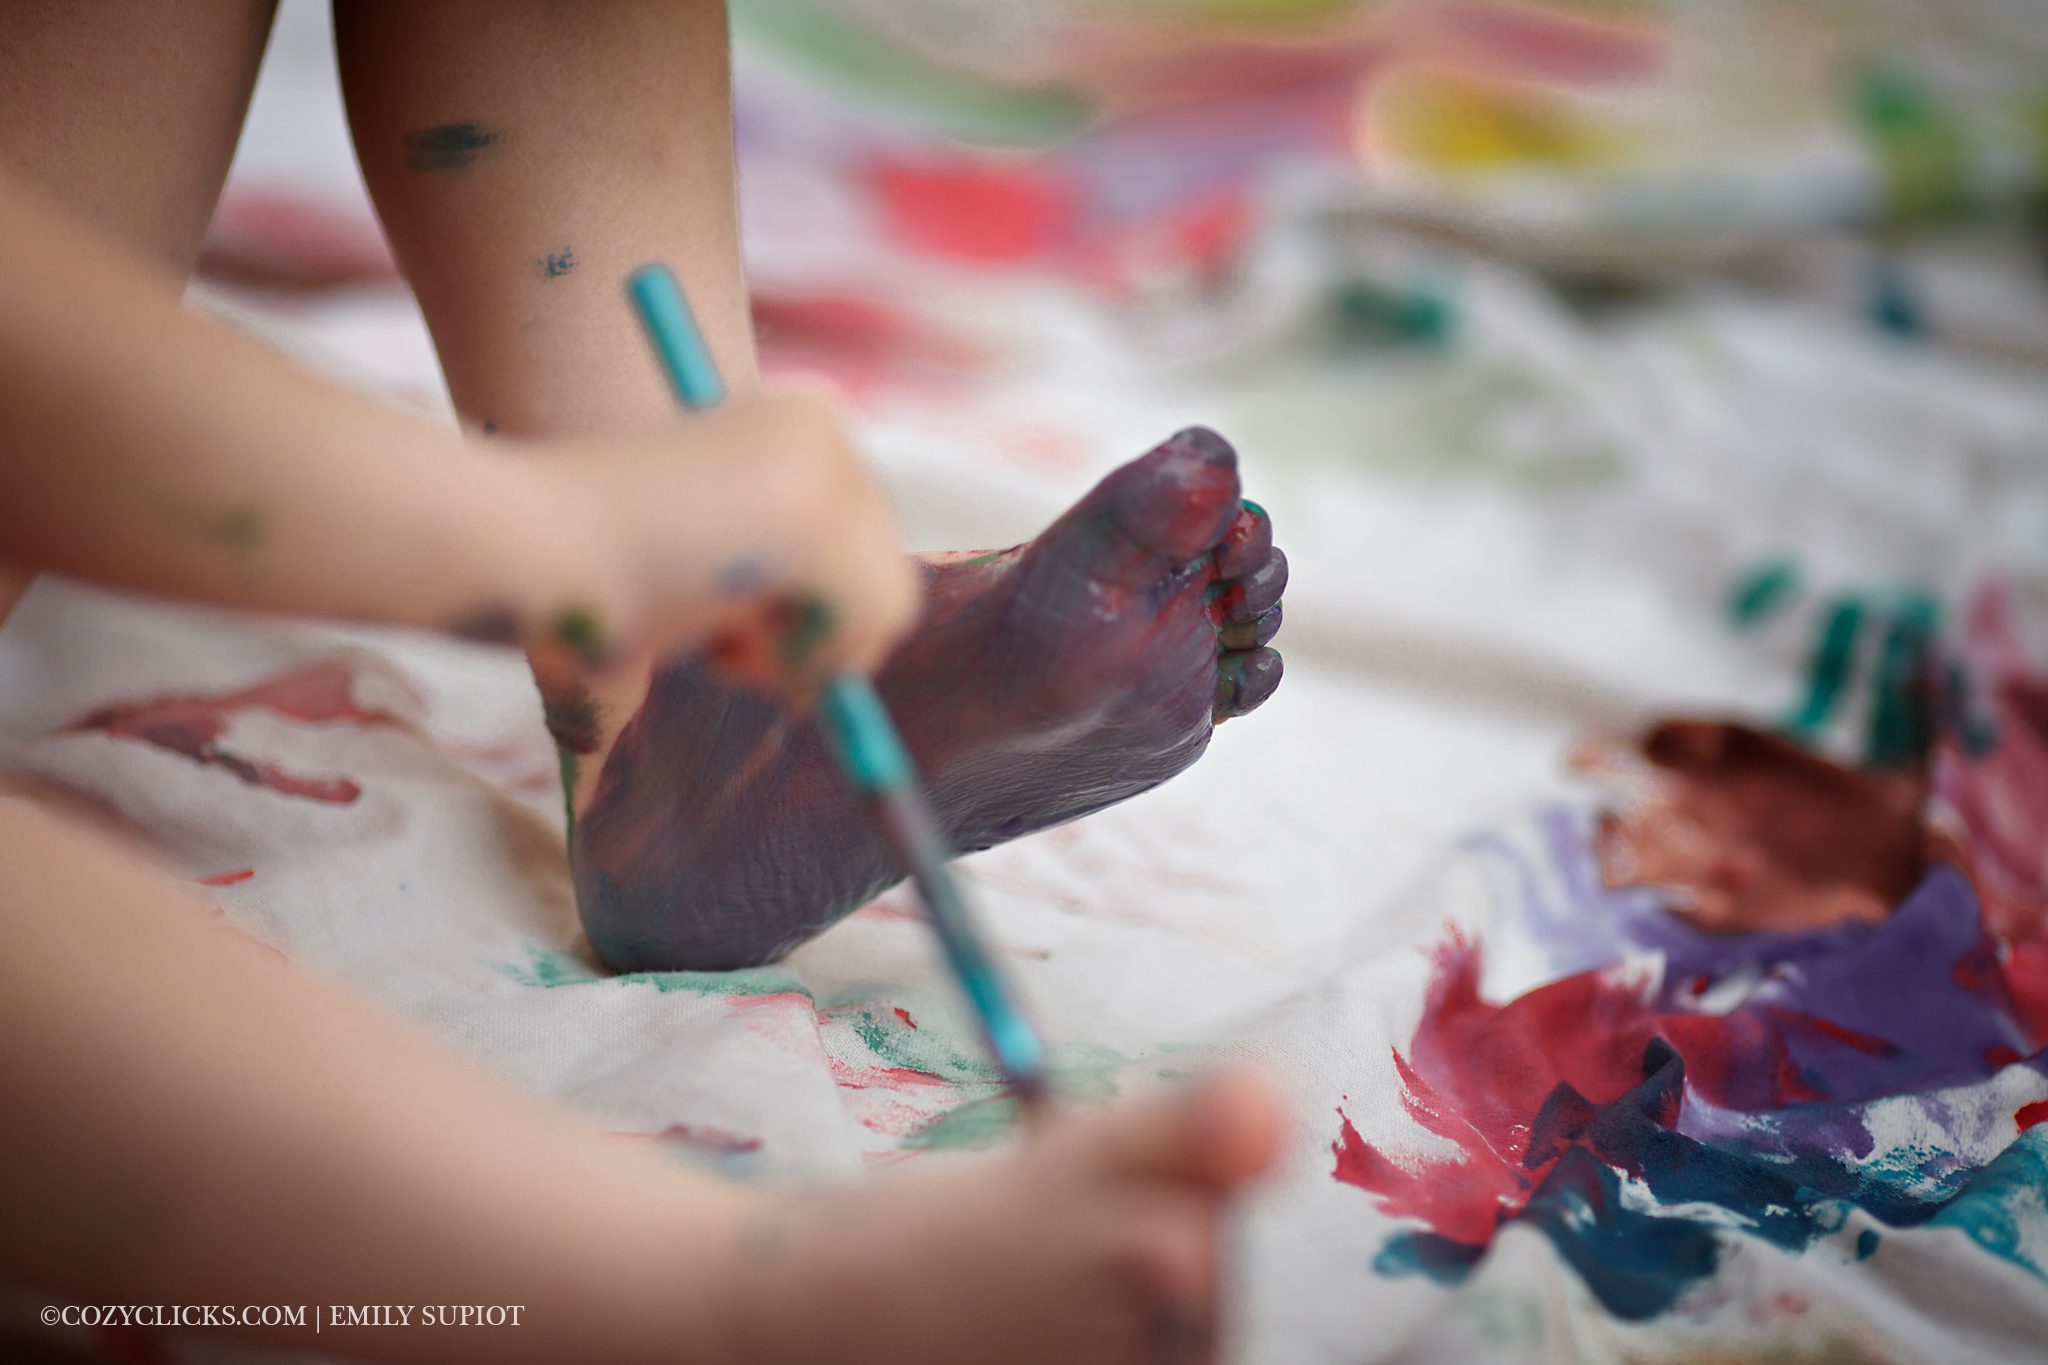 Painting feet in this fun activiyt fo rchildren to do in the summer time.